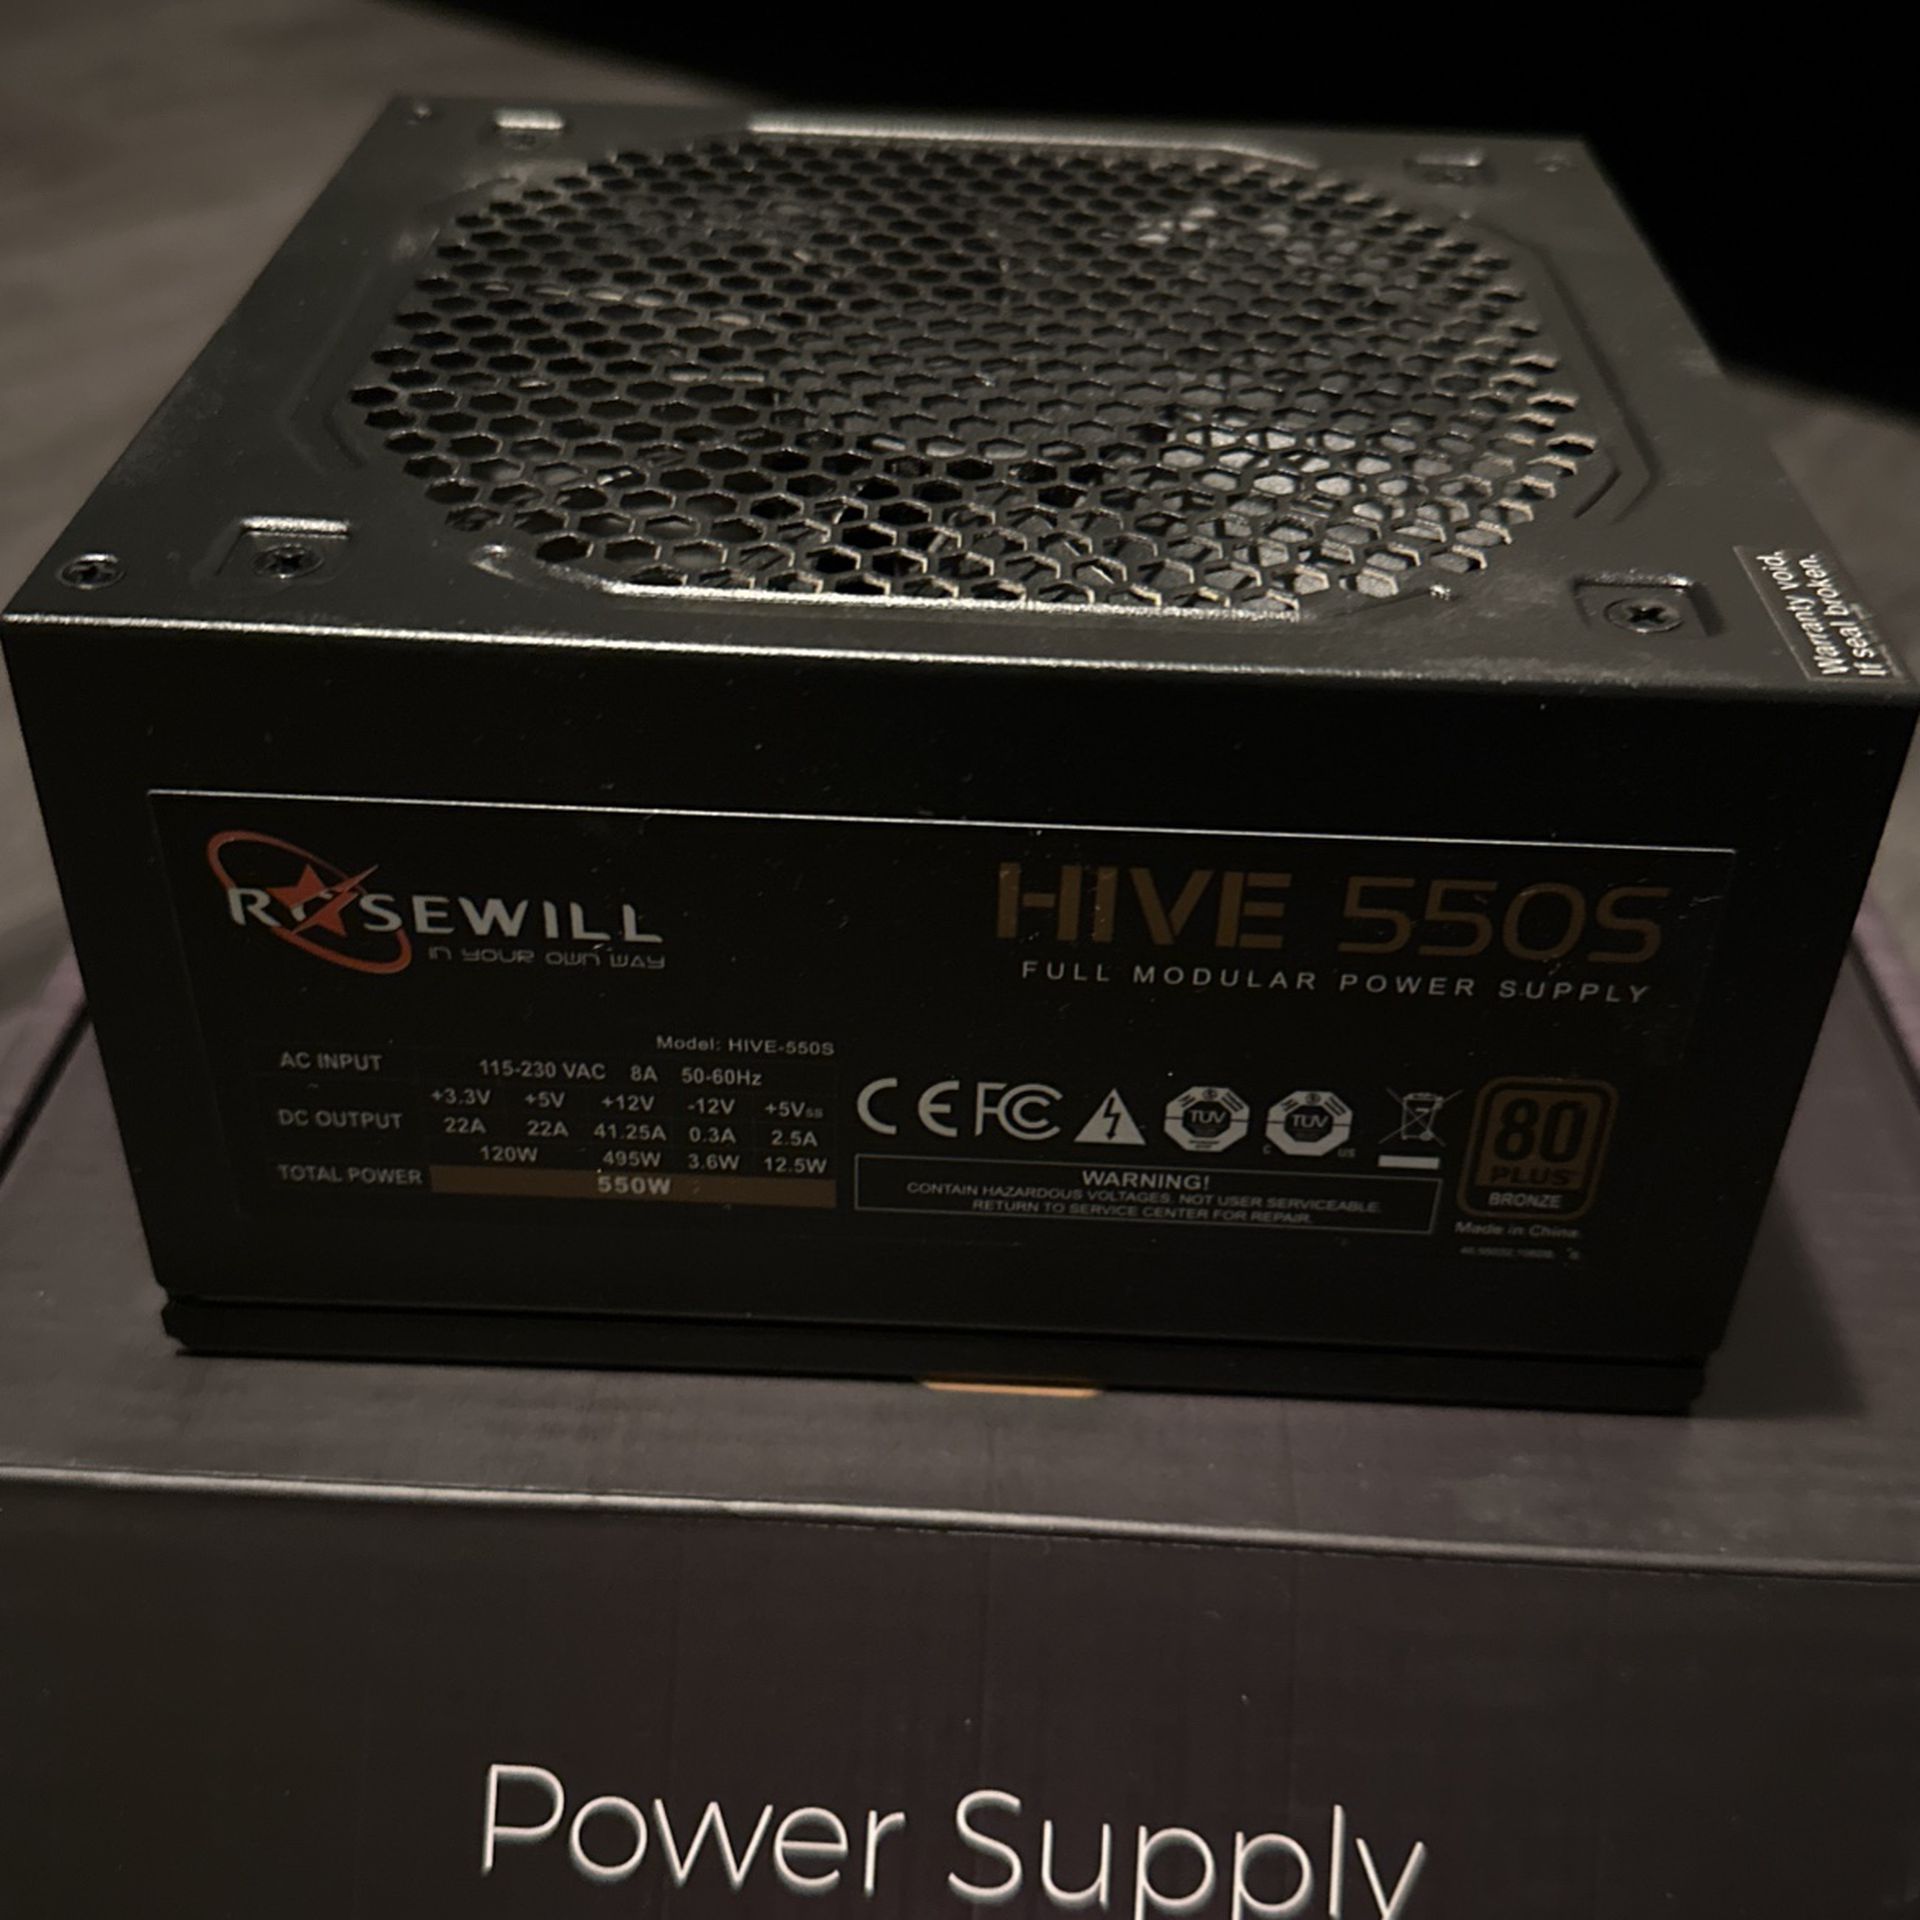 Rosewill 550w Power Supply